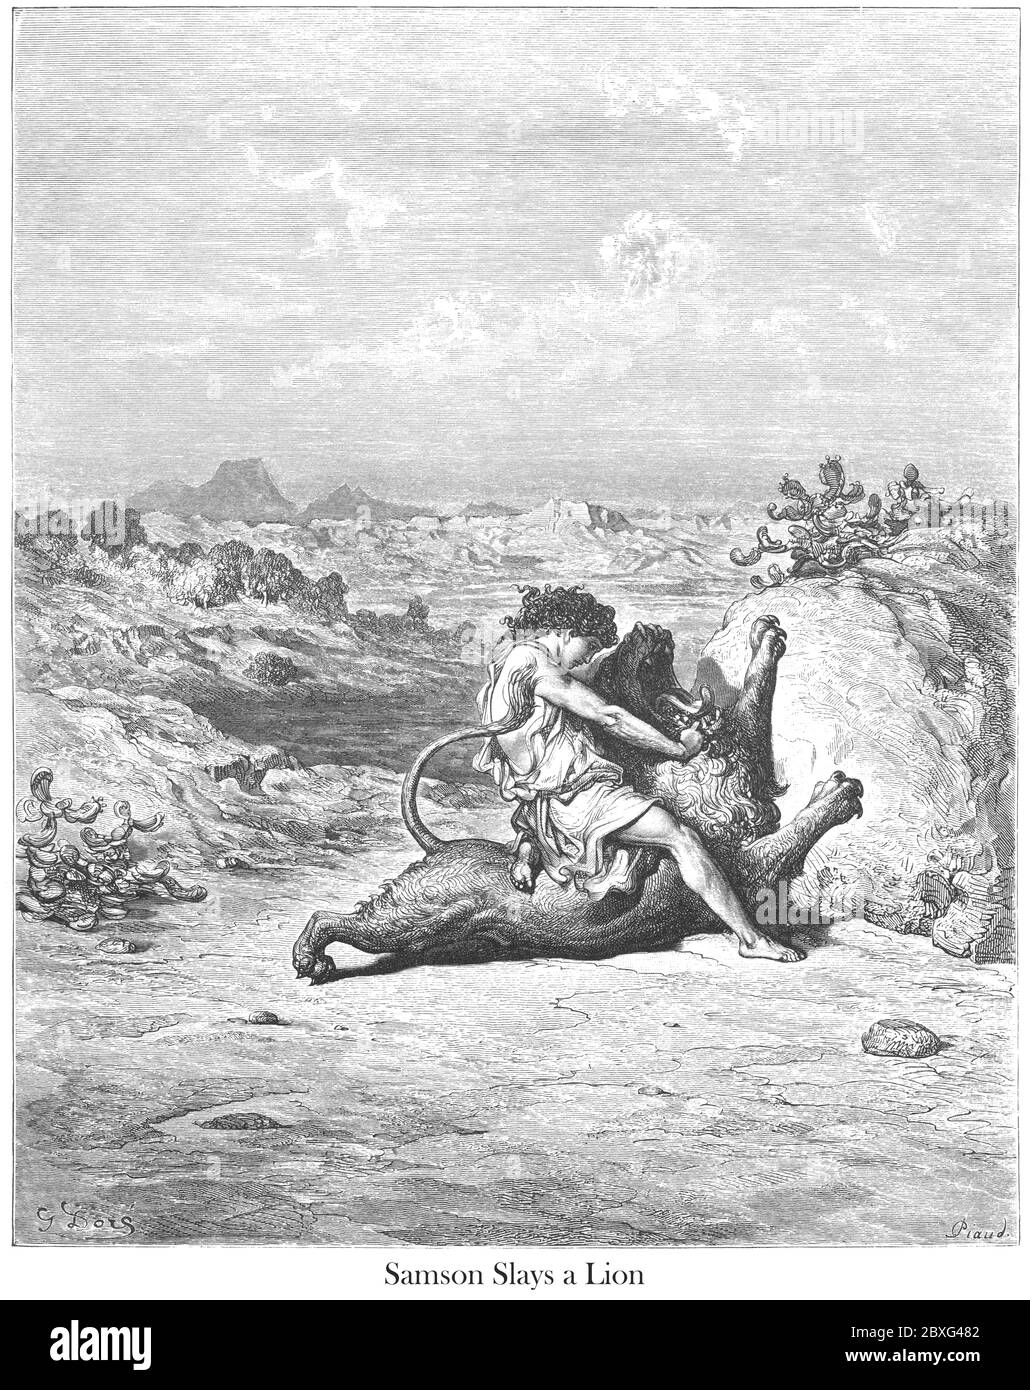 Samson Slaying a Lion Judges 14:5-6 From the book 'Bible Gallery' Illustrated by Gustave Dore with Memoir of Dore and Descriptive Letter-press by Talbot W. Chambers D.D. Published by Cassell & Company Limited in London and simultaneously by Mame in Tours, France in 1866 Stock Photo